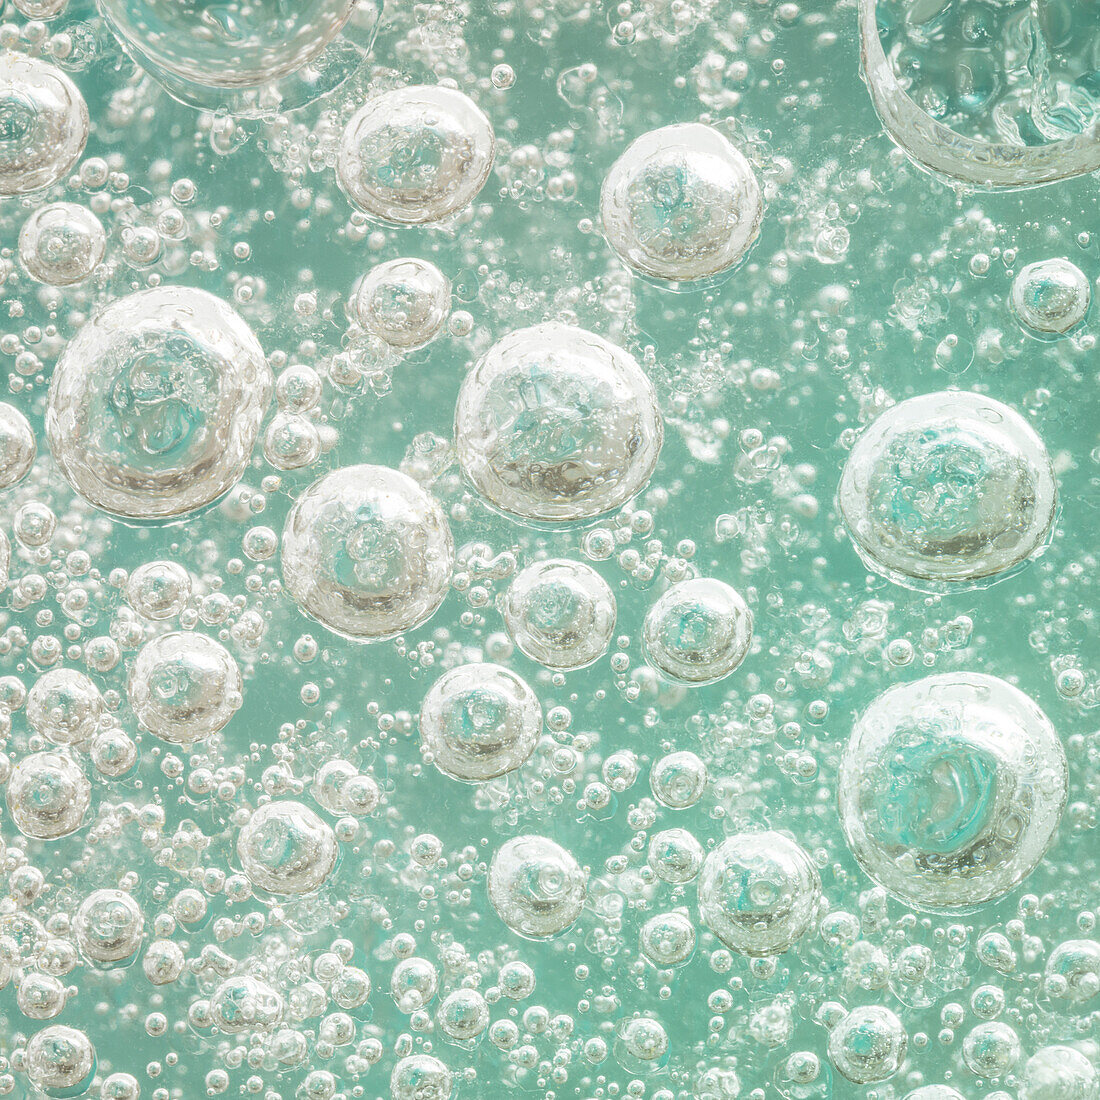 USA, Washington State, Seabeck. Bubbles frozen in ice